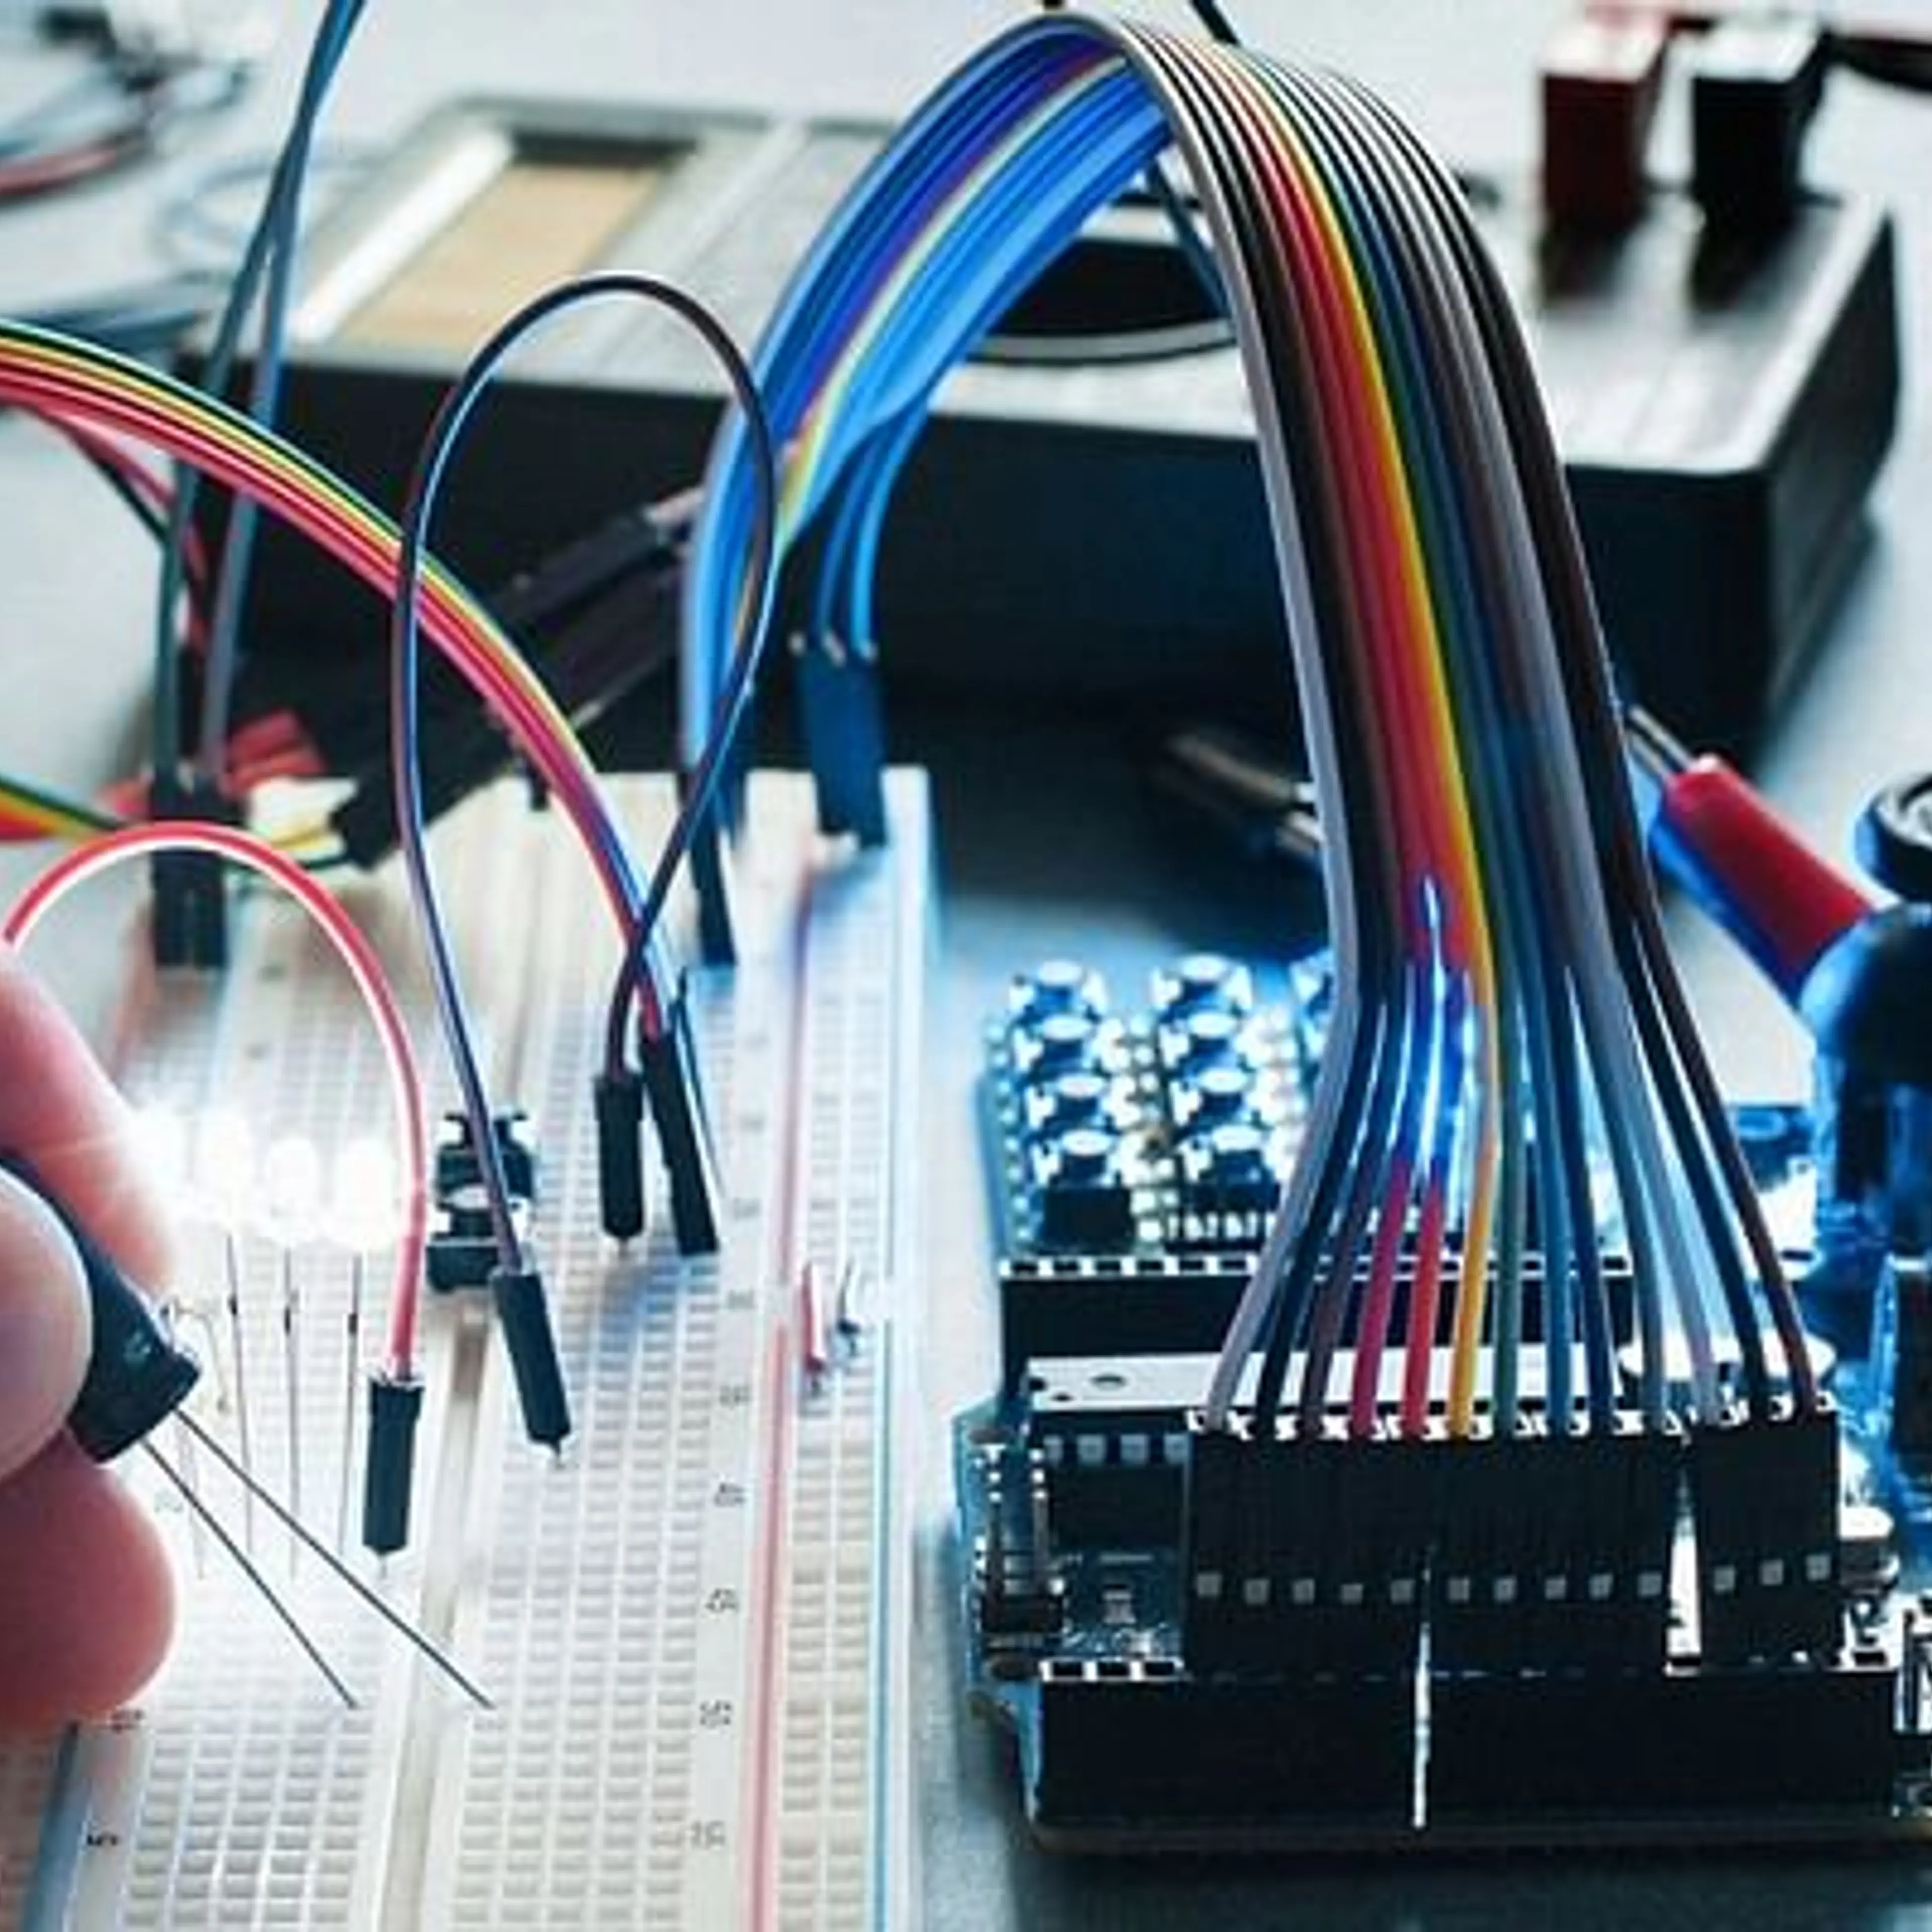 Electronic components demand to jump 5x to $240B by 2030, high PLI must to boost local mfg: CII